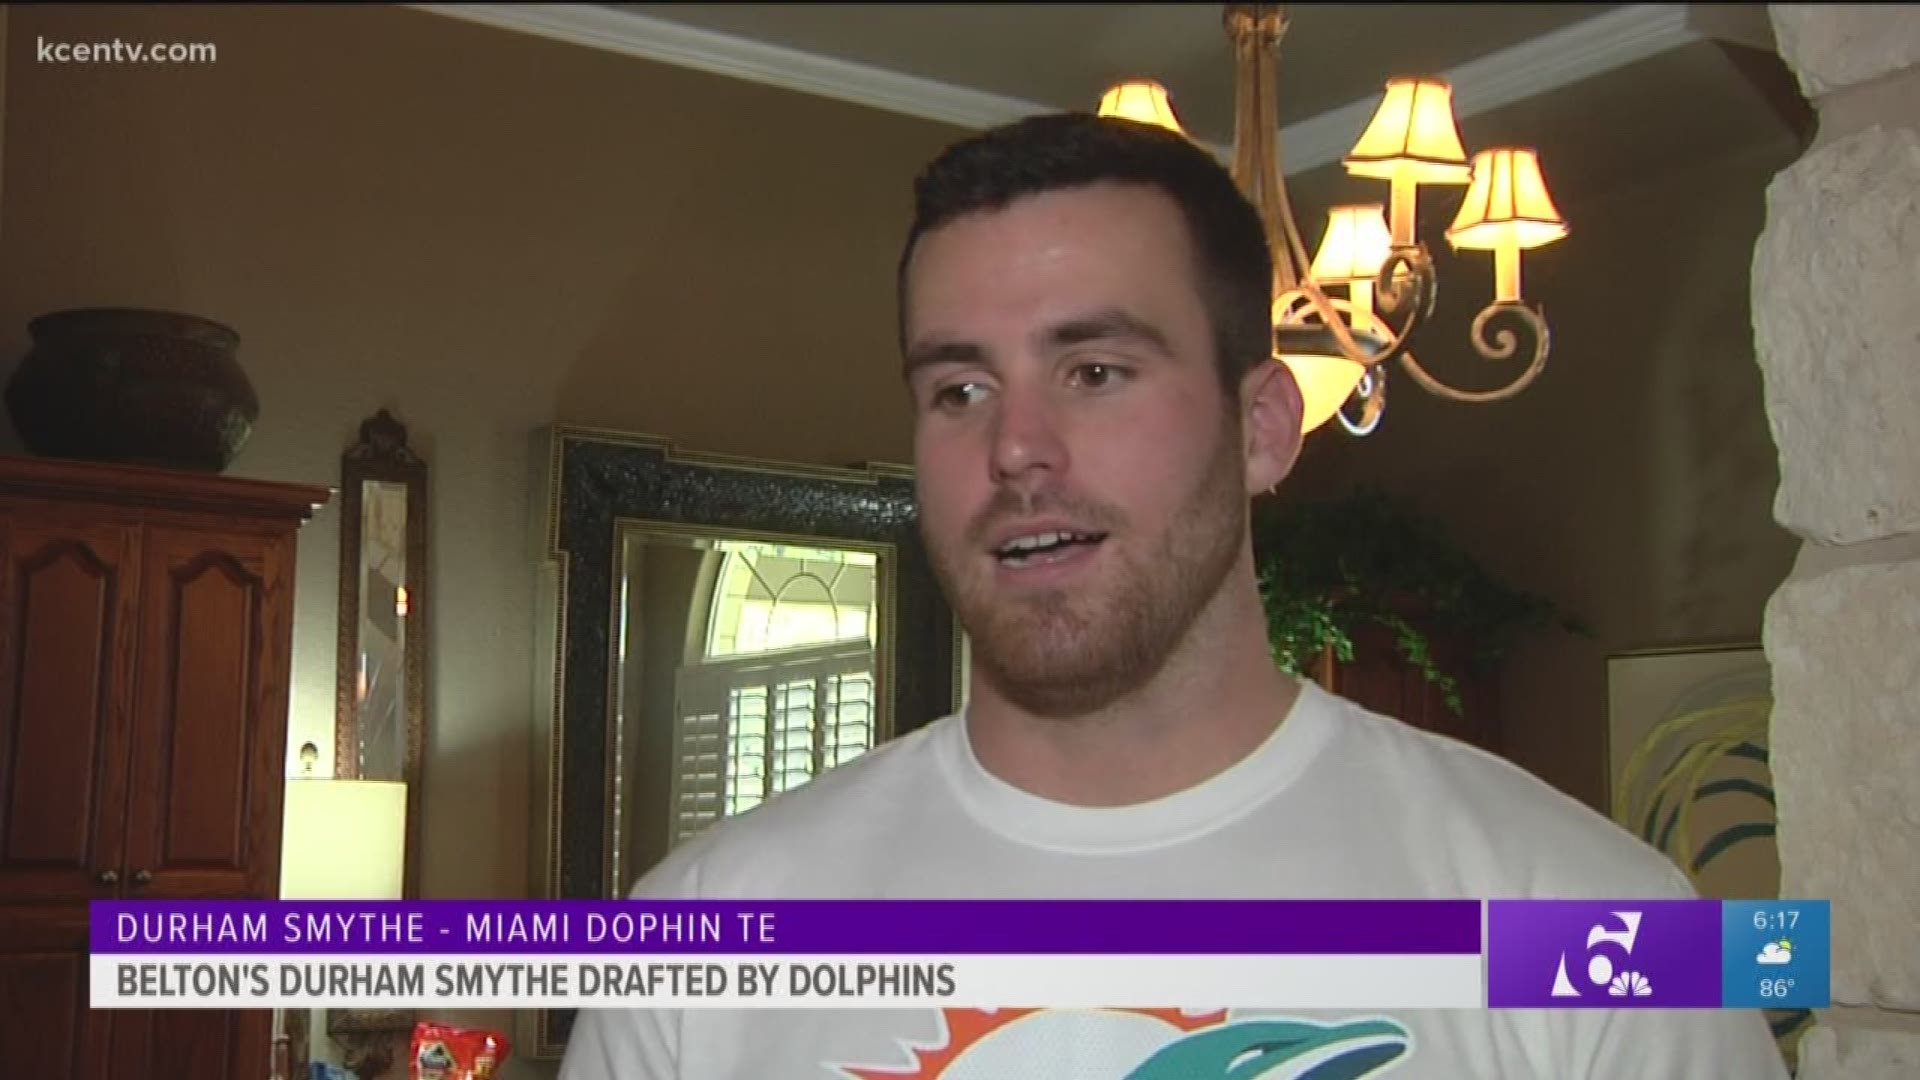 Former Belton Tiger Durham Smythe drafted by Miami Dolphins